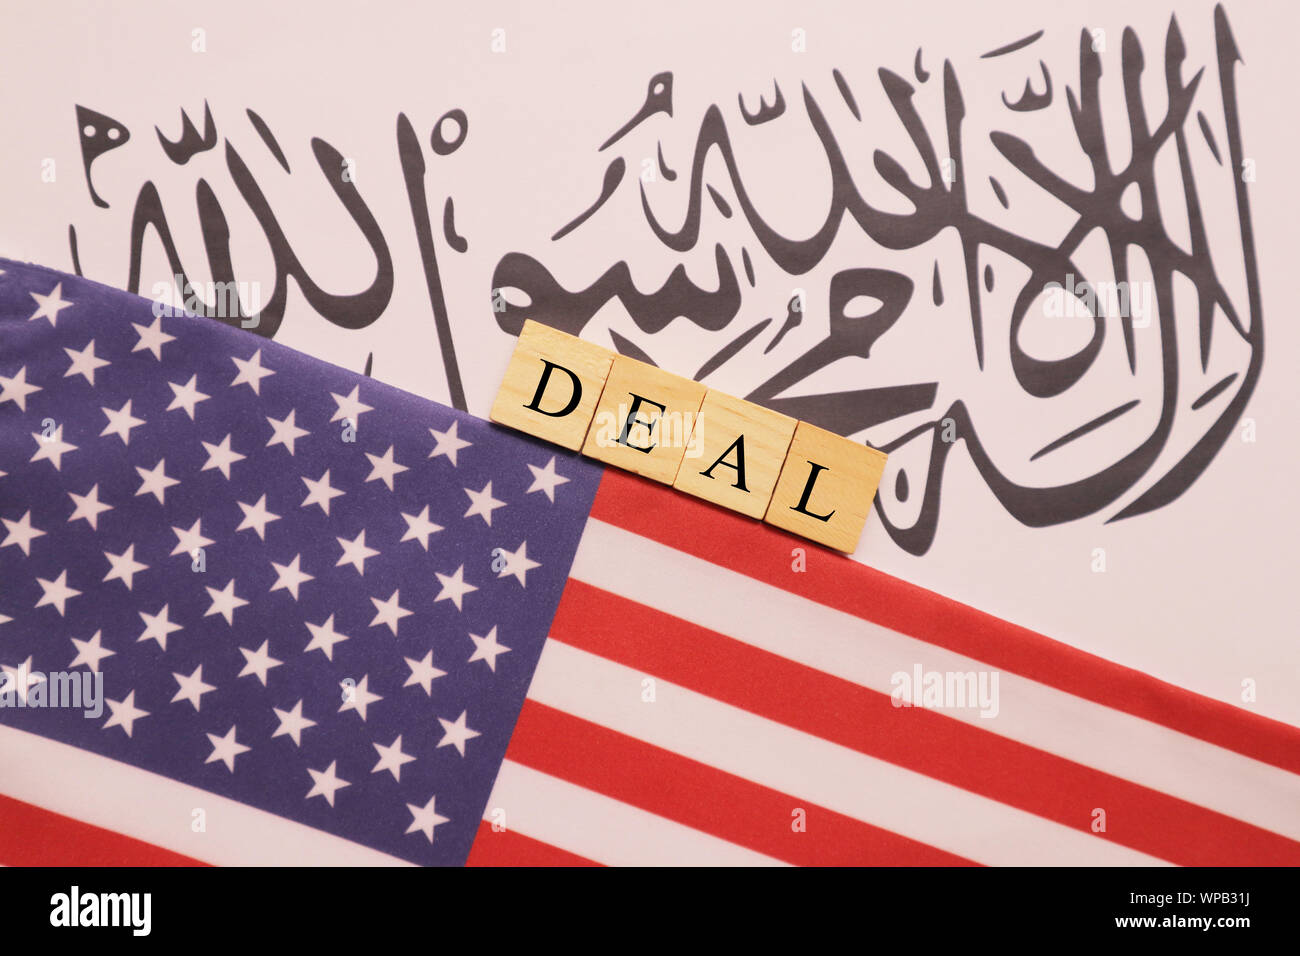 Concept showing of US and Taliban deal preocess showing with flags. Stock Photo